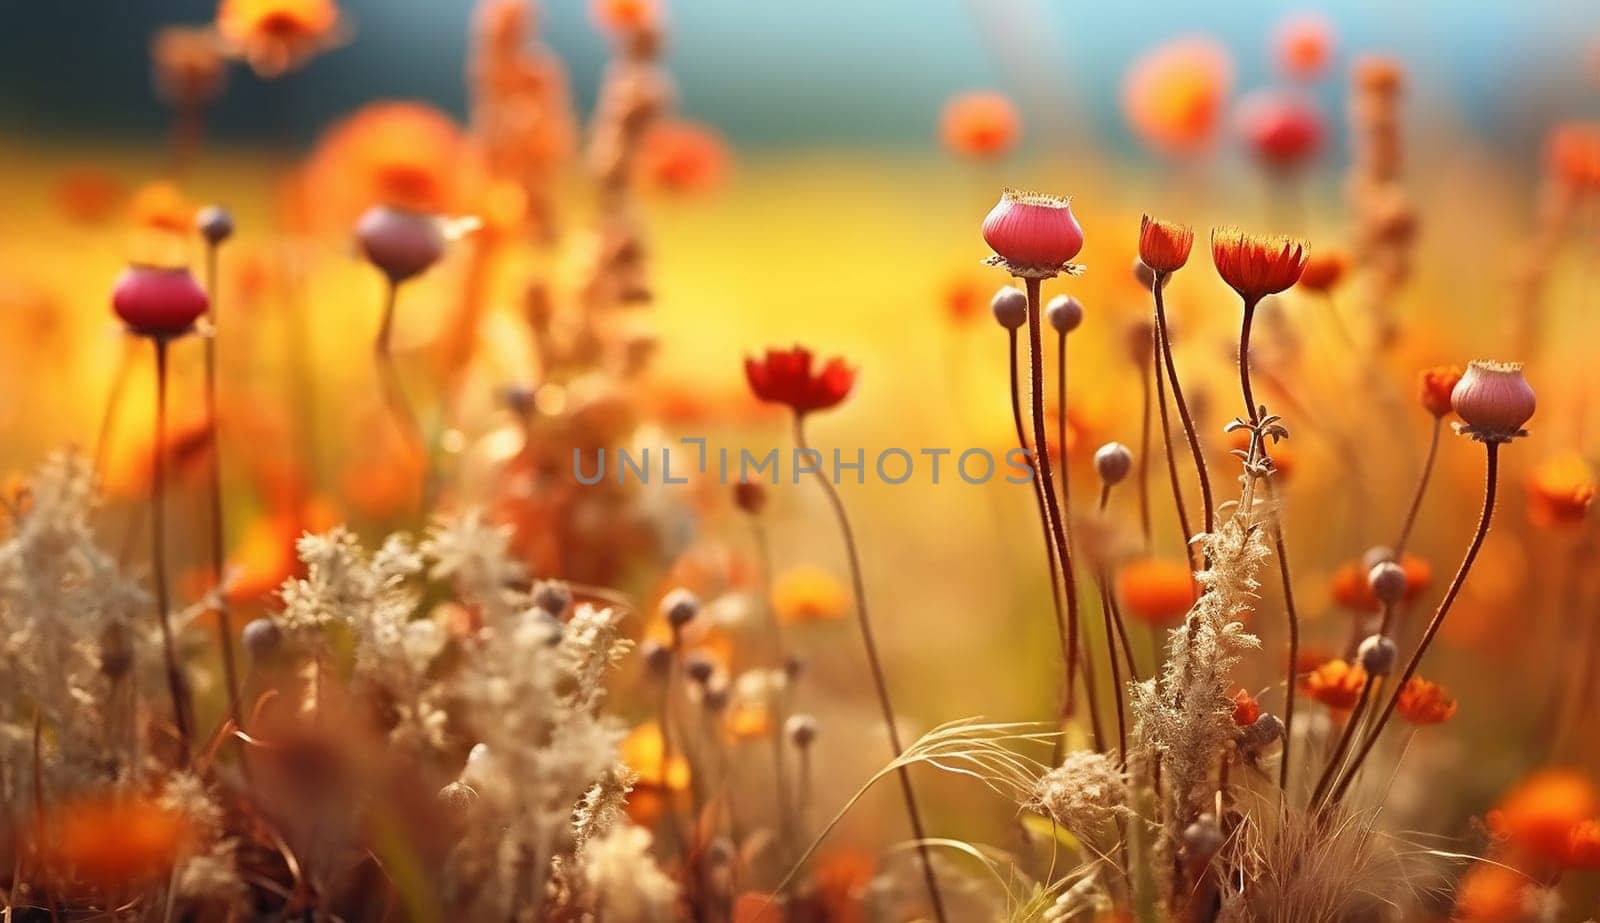 meadow flowers in early sunny fresh morning. Vintage autumn landscape background. colorful beautiful fall flowers magical